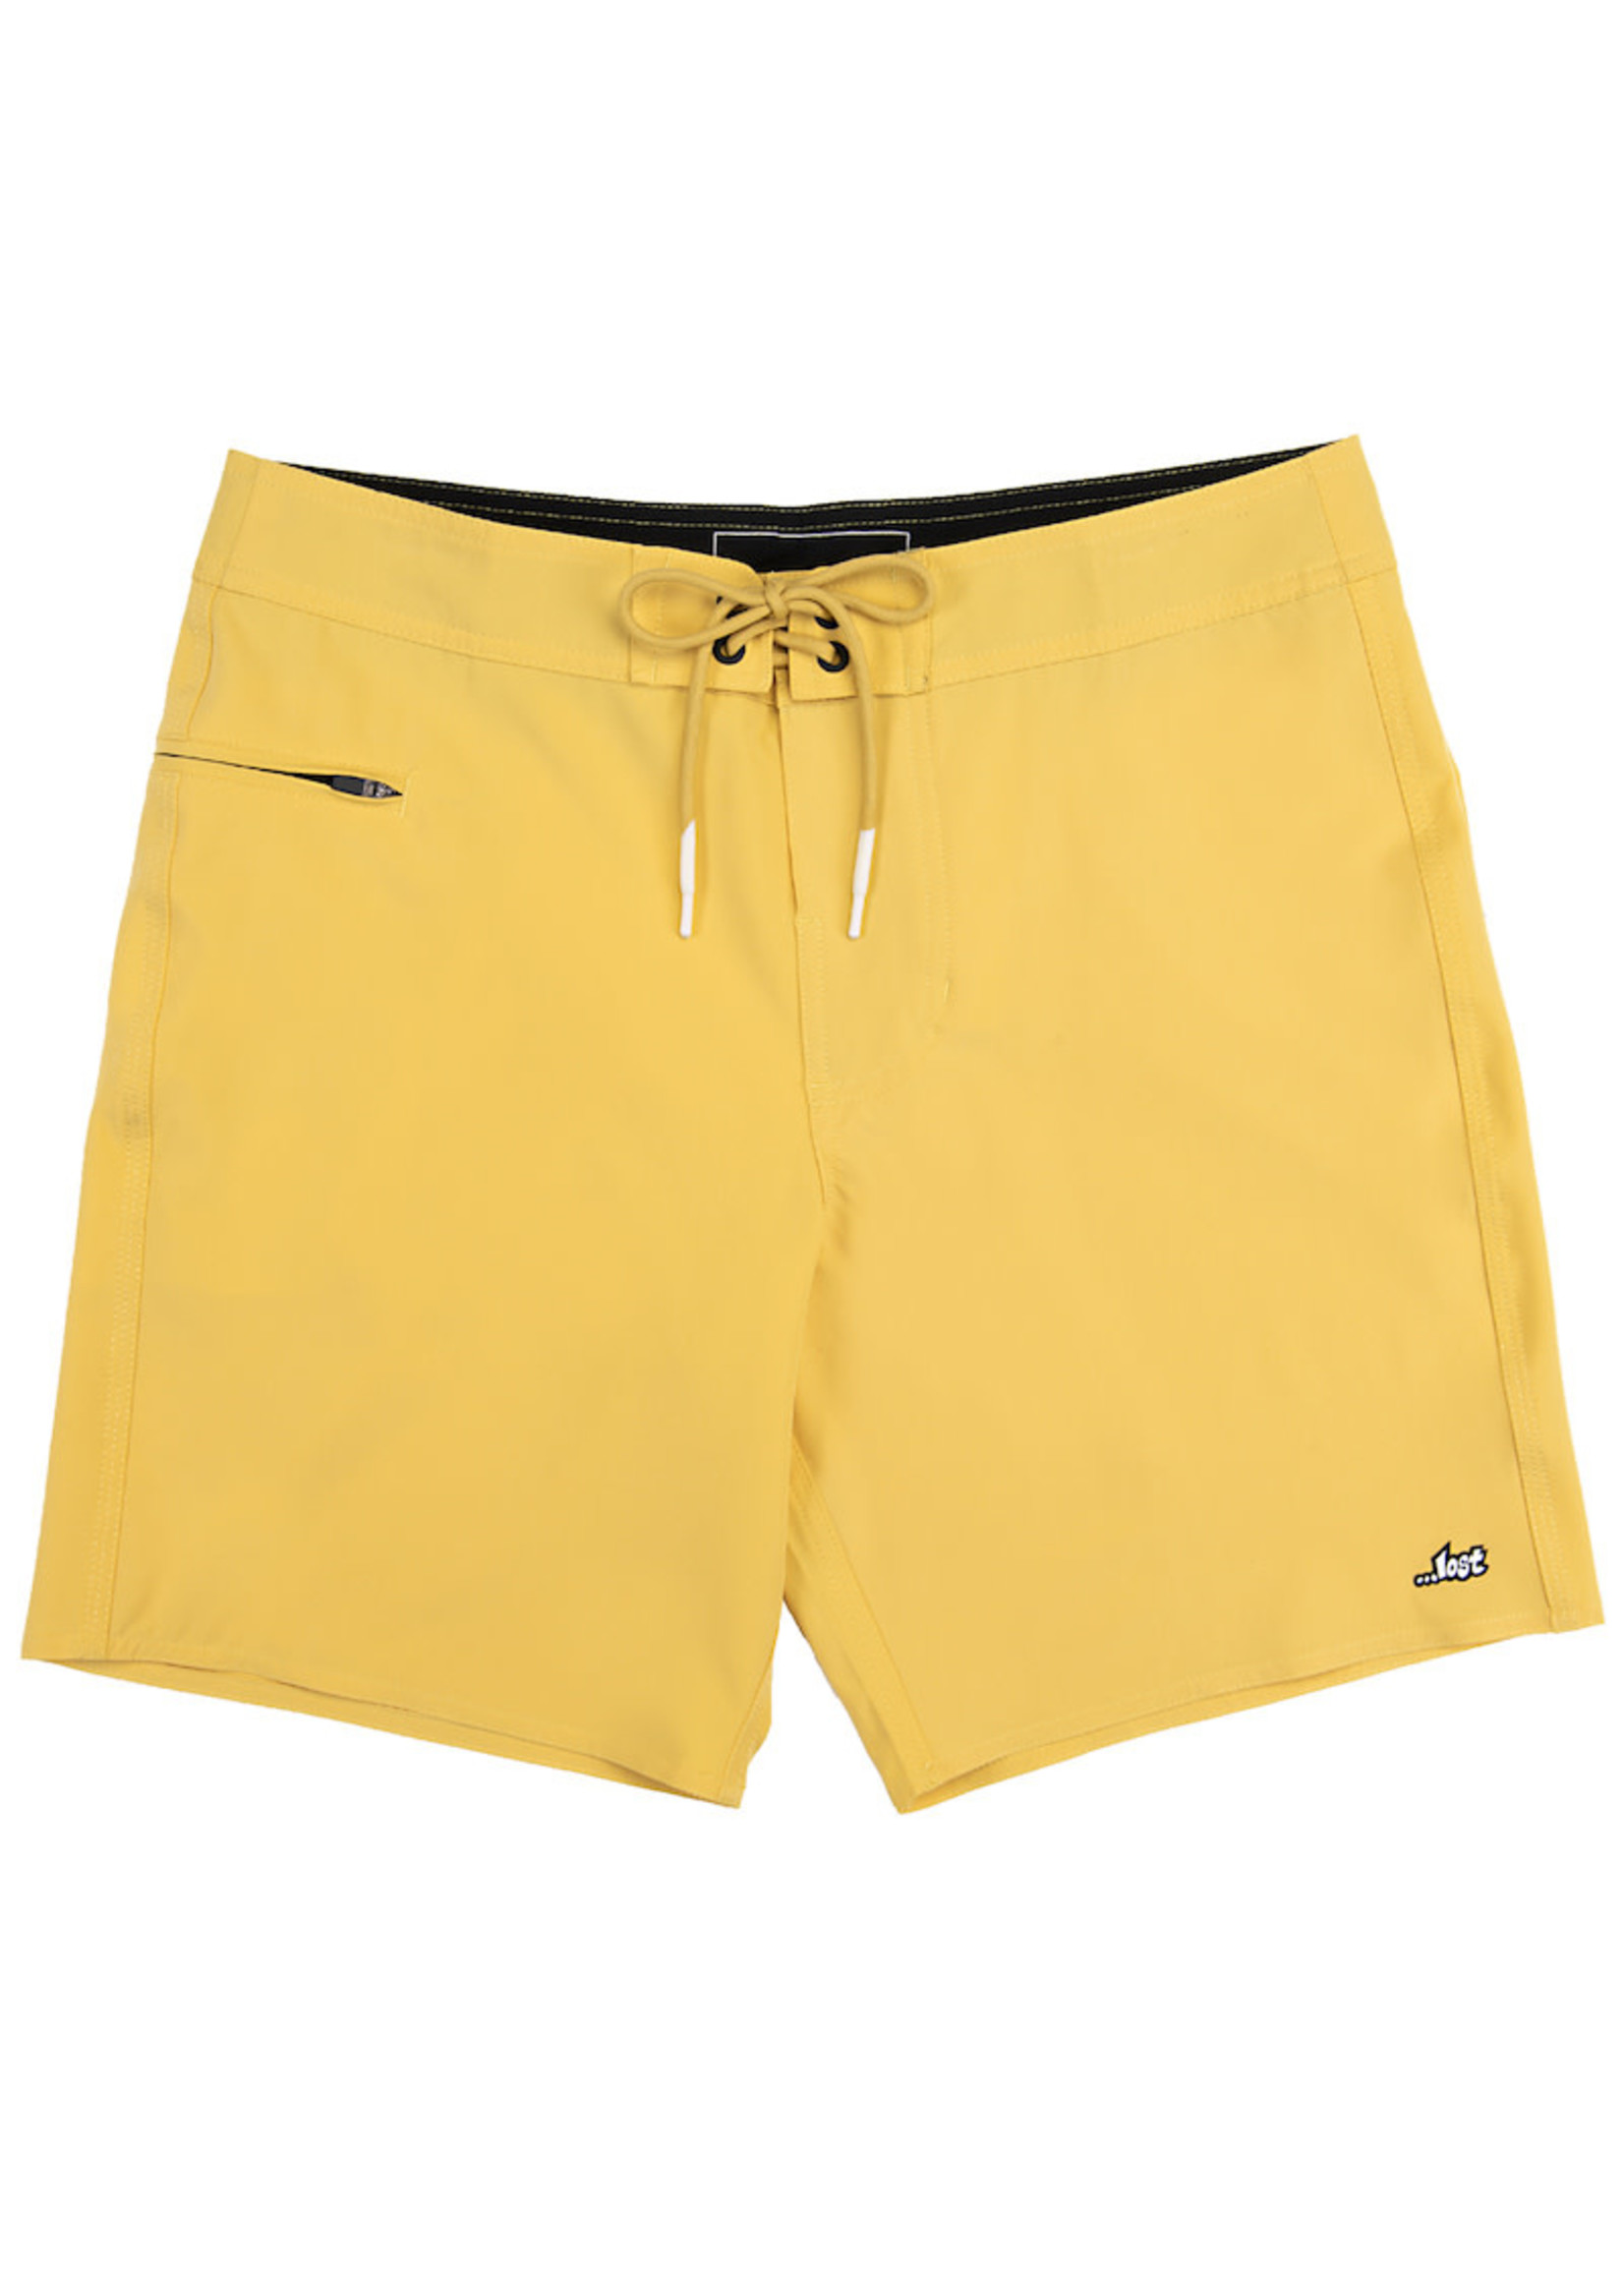 Lost Lost Session Boardshort